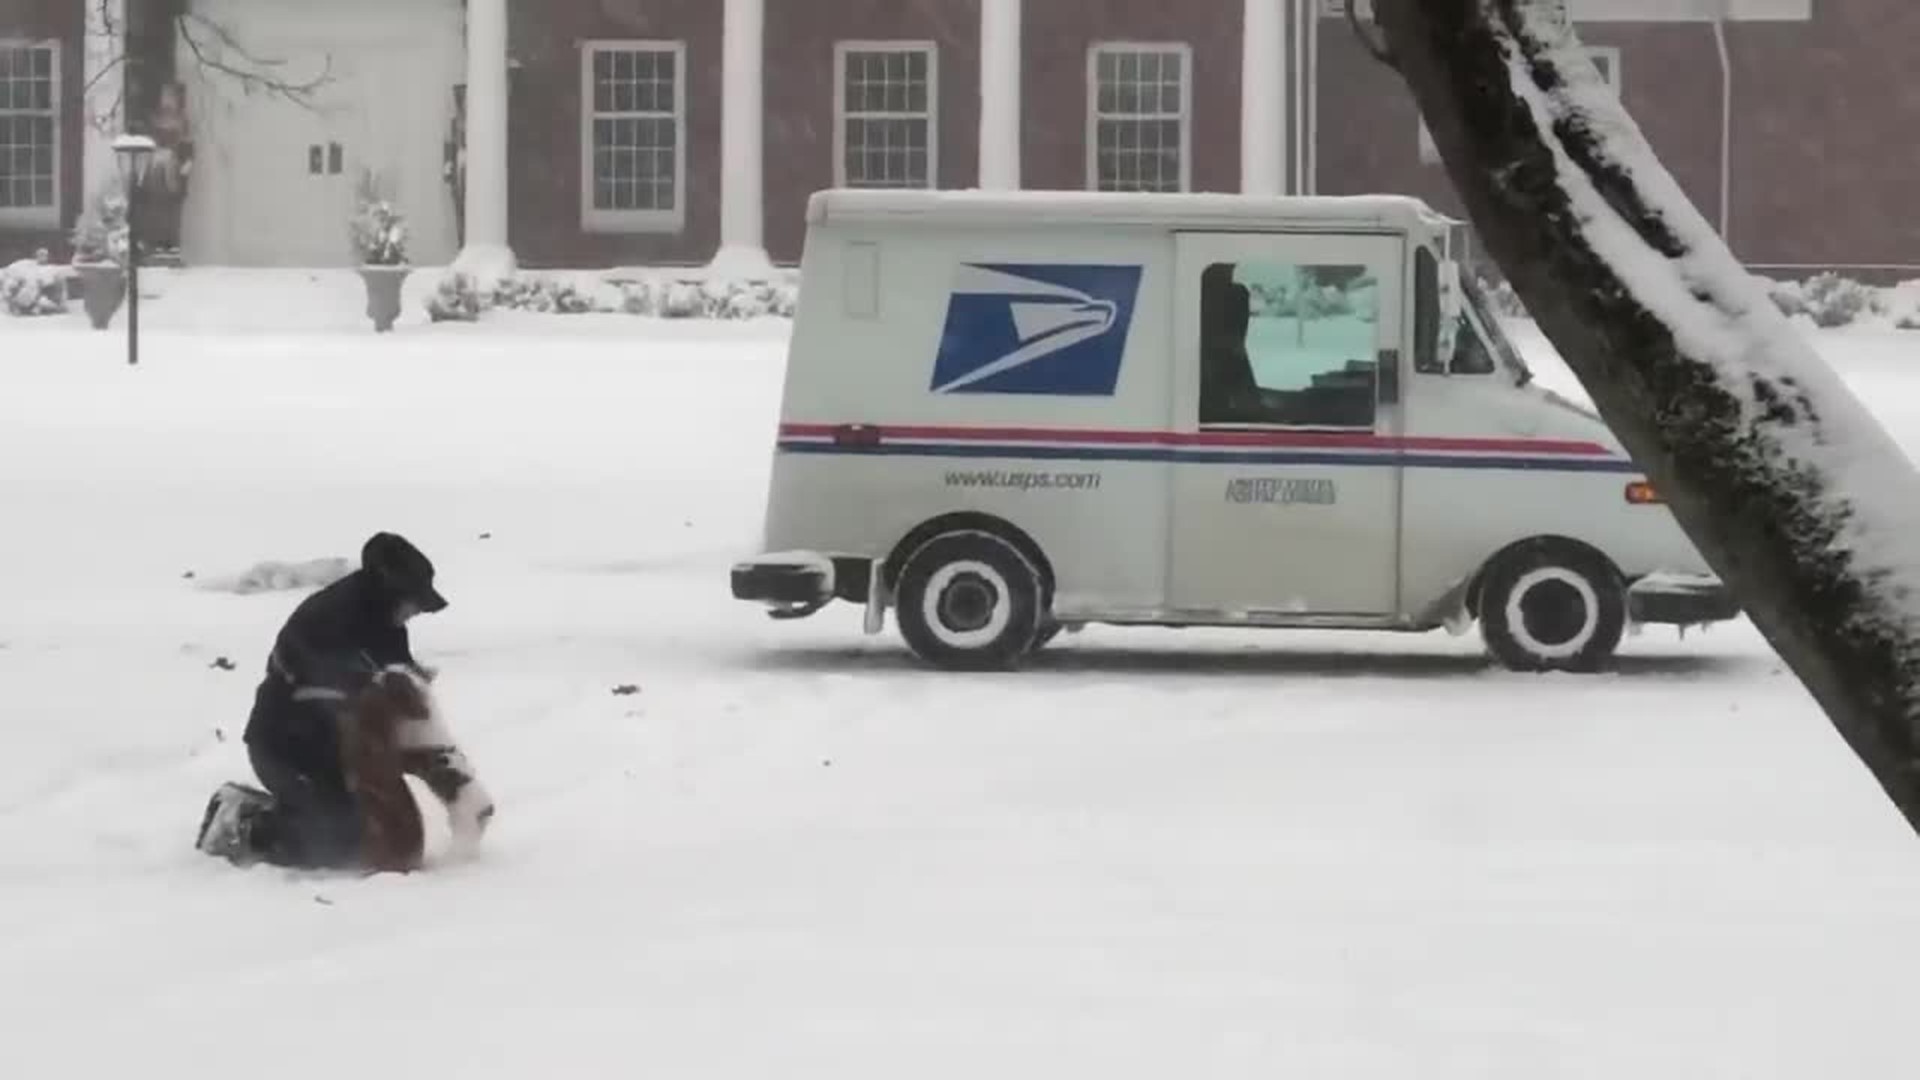 ADORABLE: Mail carrier stops truck to visit with dogs playing in snowstorm